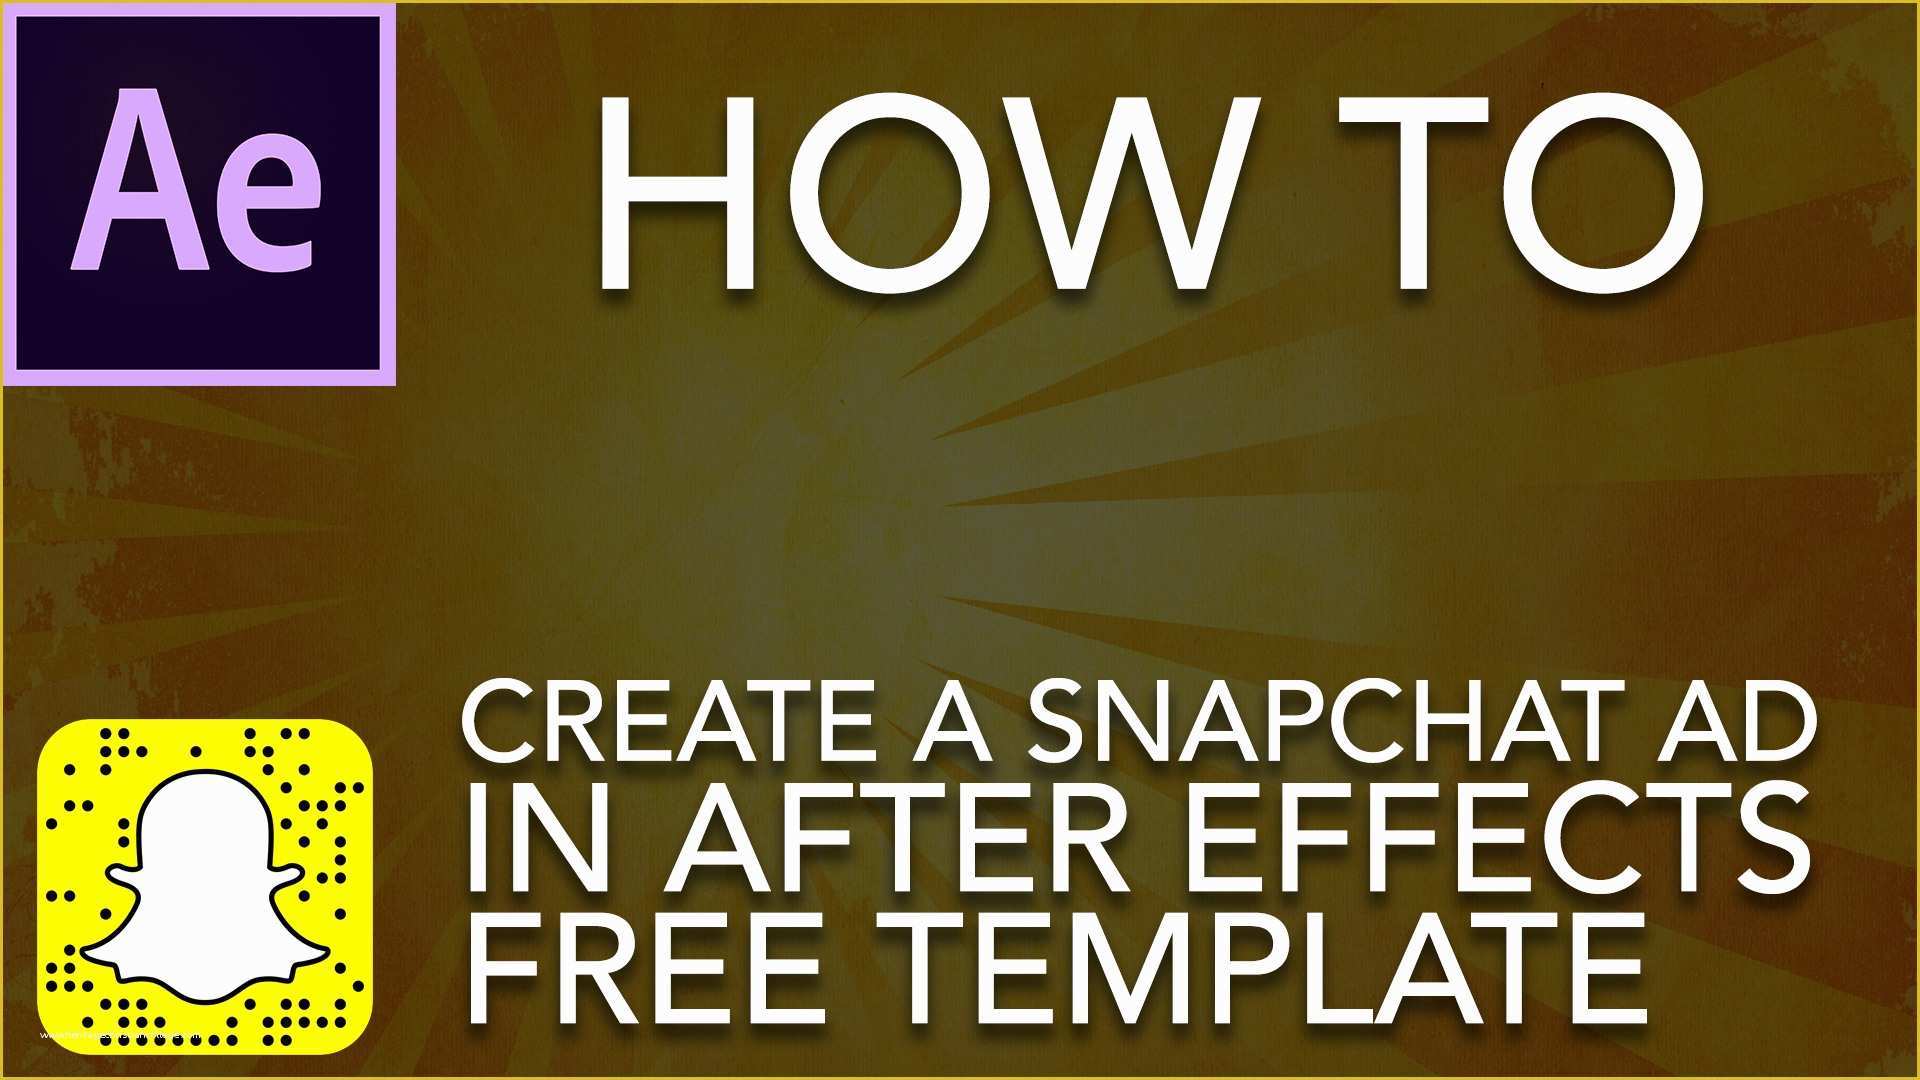 After Effects Commercial Template Free Of Snapchat Ad In after Effects with Template